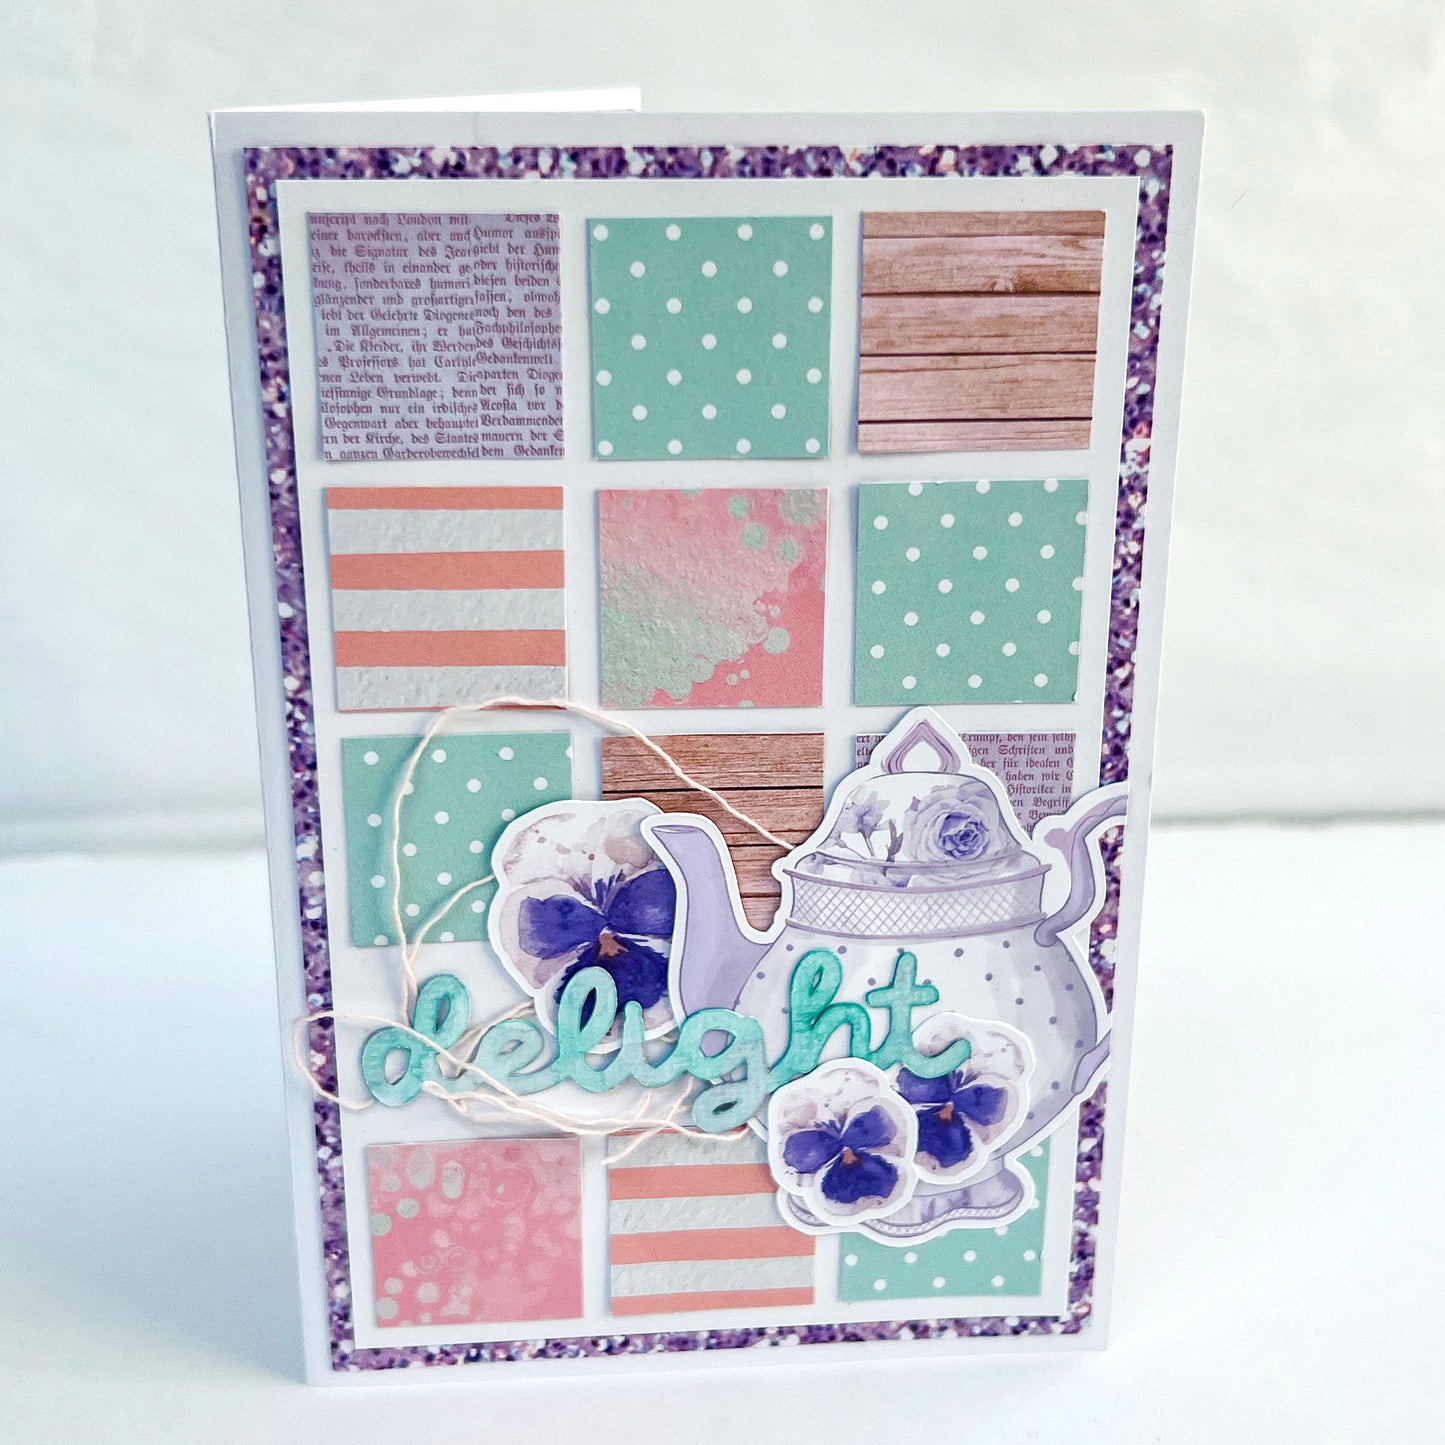 Springtime Tea Party 12x12 Double-Sided Patterned Paper 005 - Designed by Alicia Redshaw Exclusively for Scrapbook Fantasies